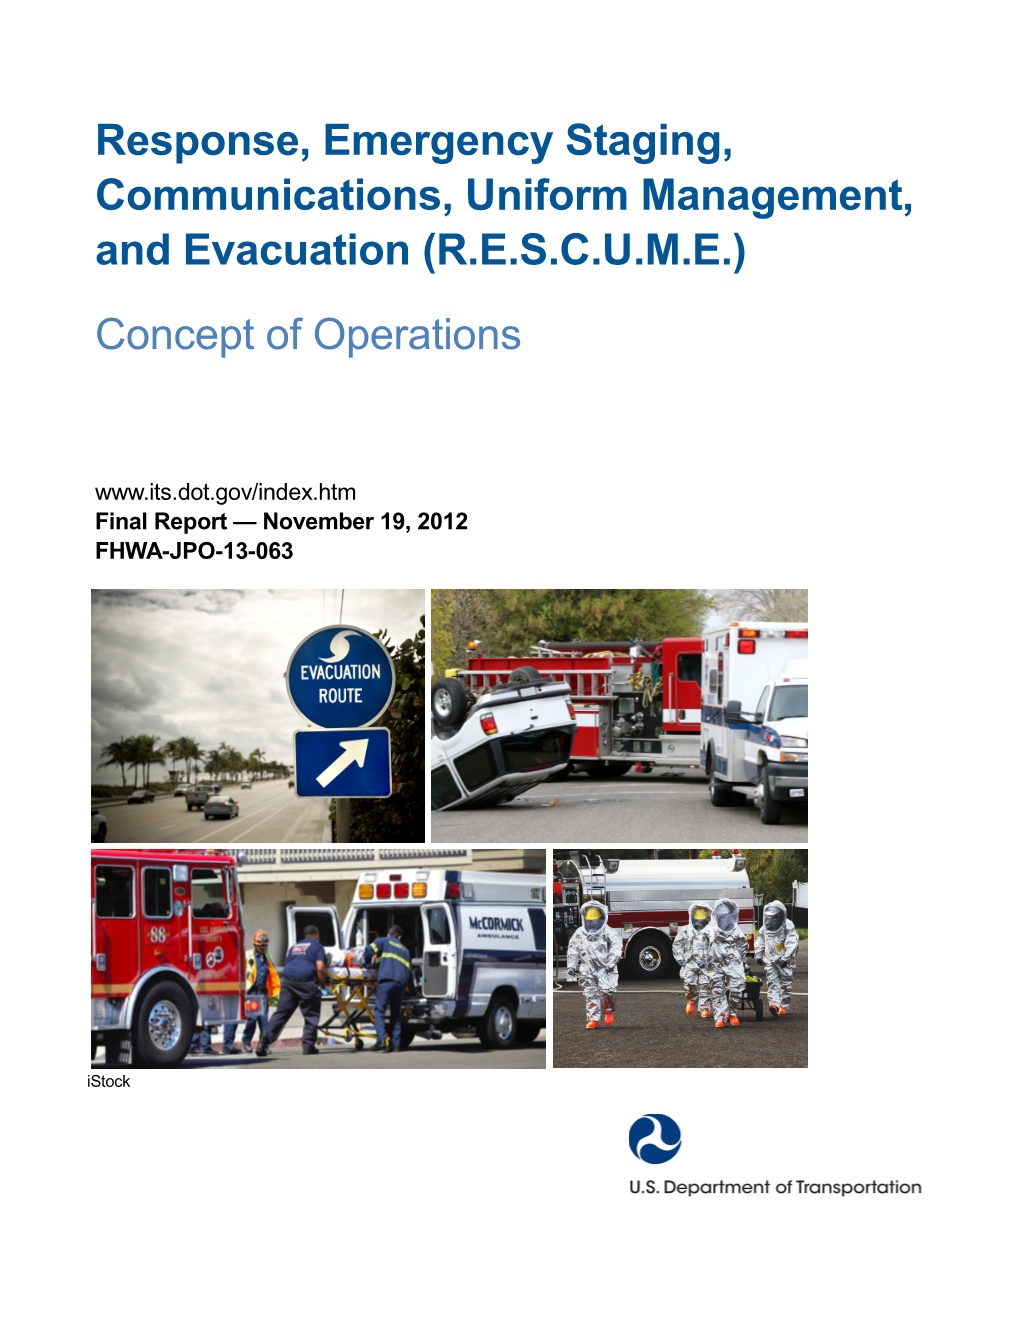 Response, Emergency Staging, Communications, Uniform Management, and Evacuation (R.E.S.C.U.M.E.) Concept of Operations